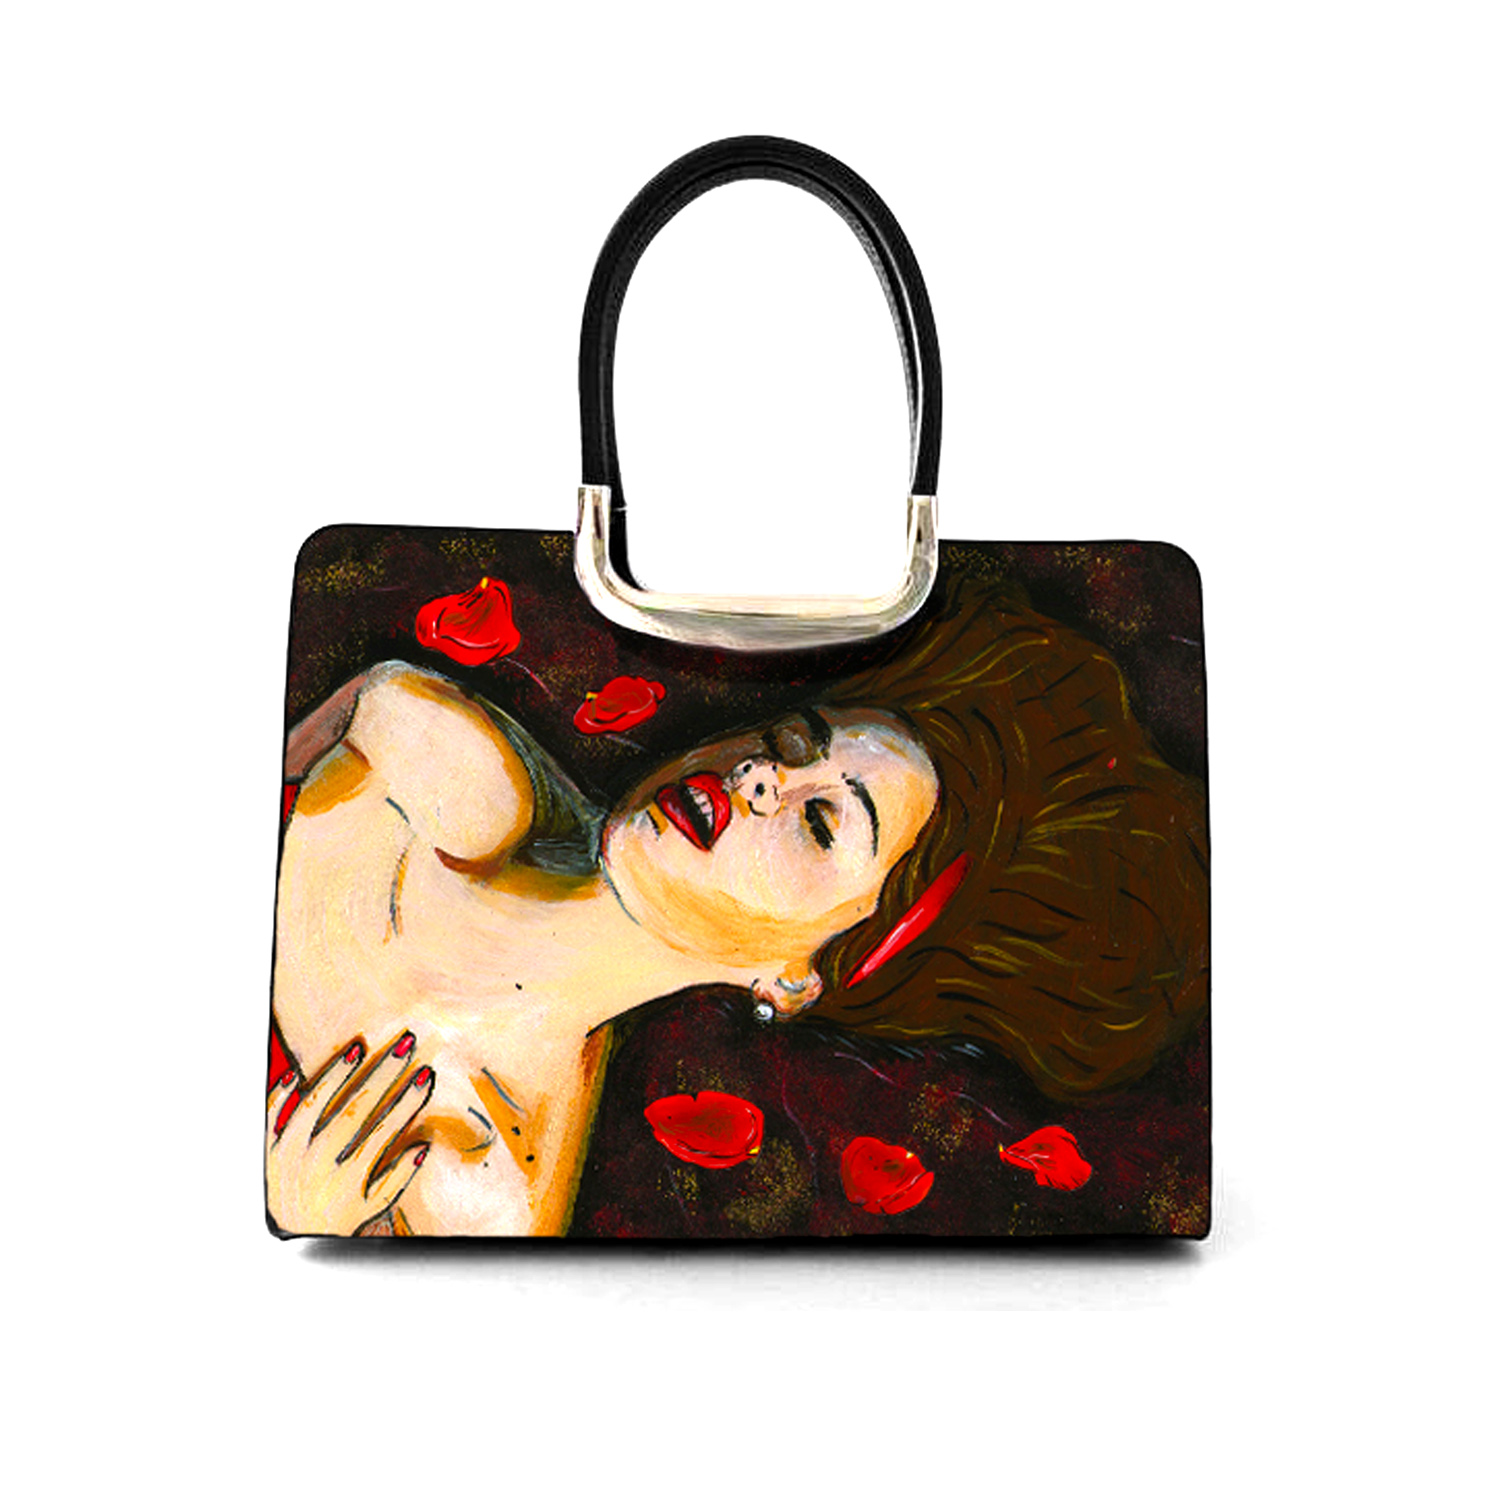 Hand-painted bag - Lust